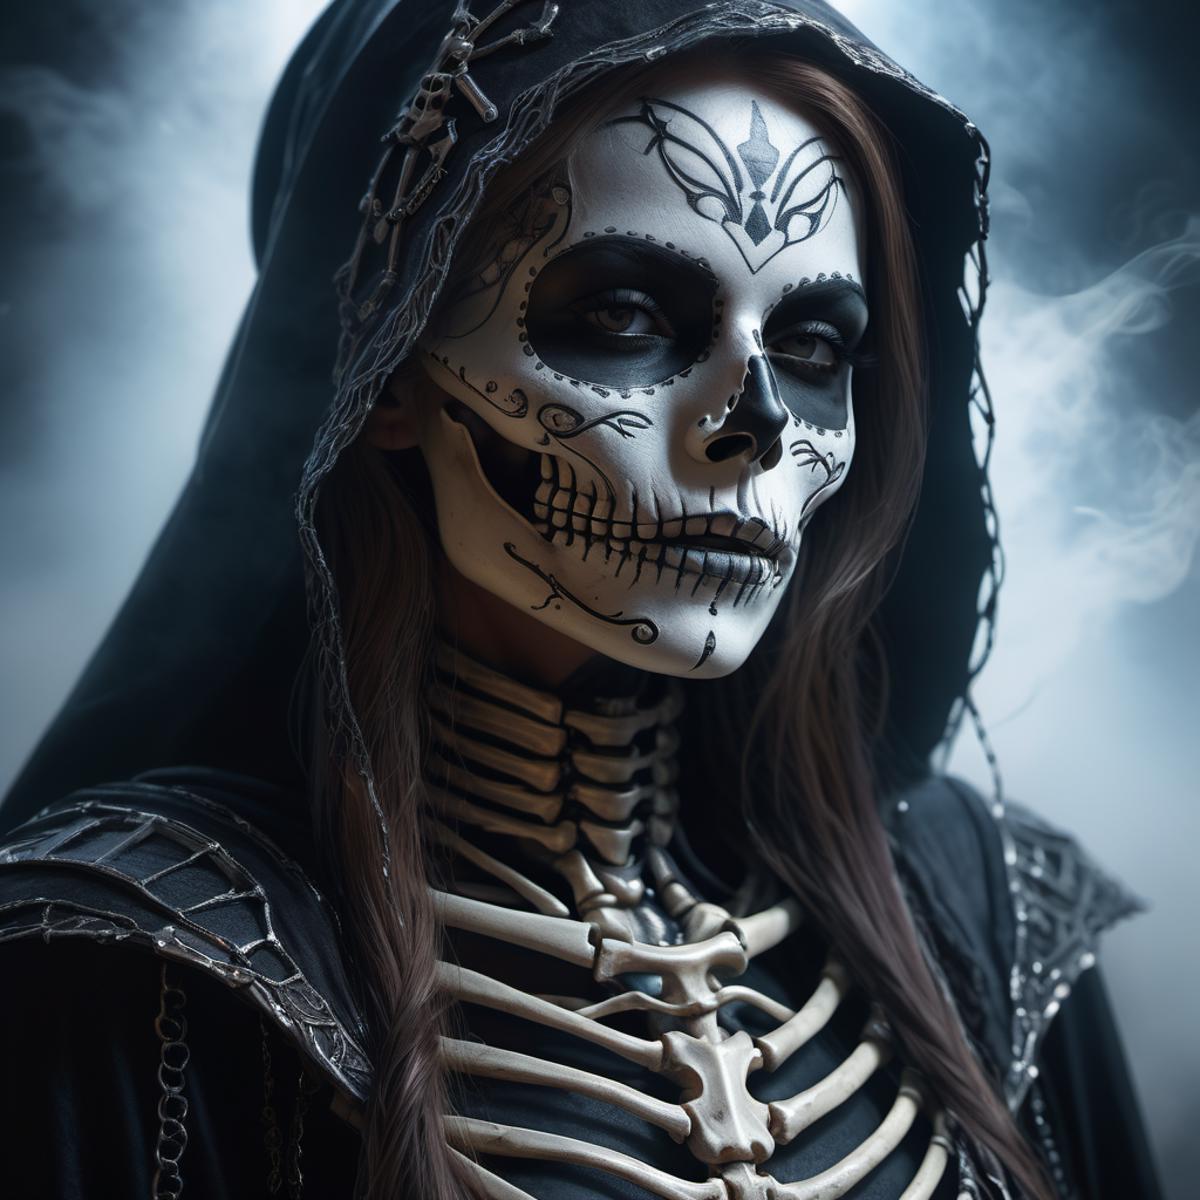 A woman wearing a skeleton makeup and a black hooded robe.